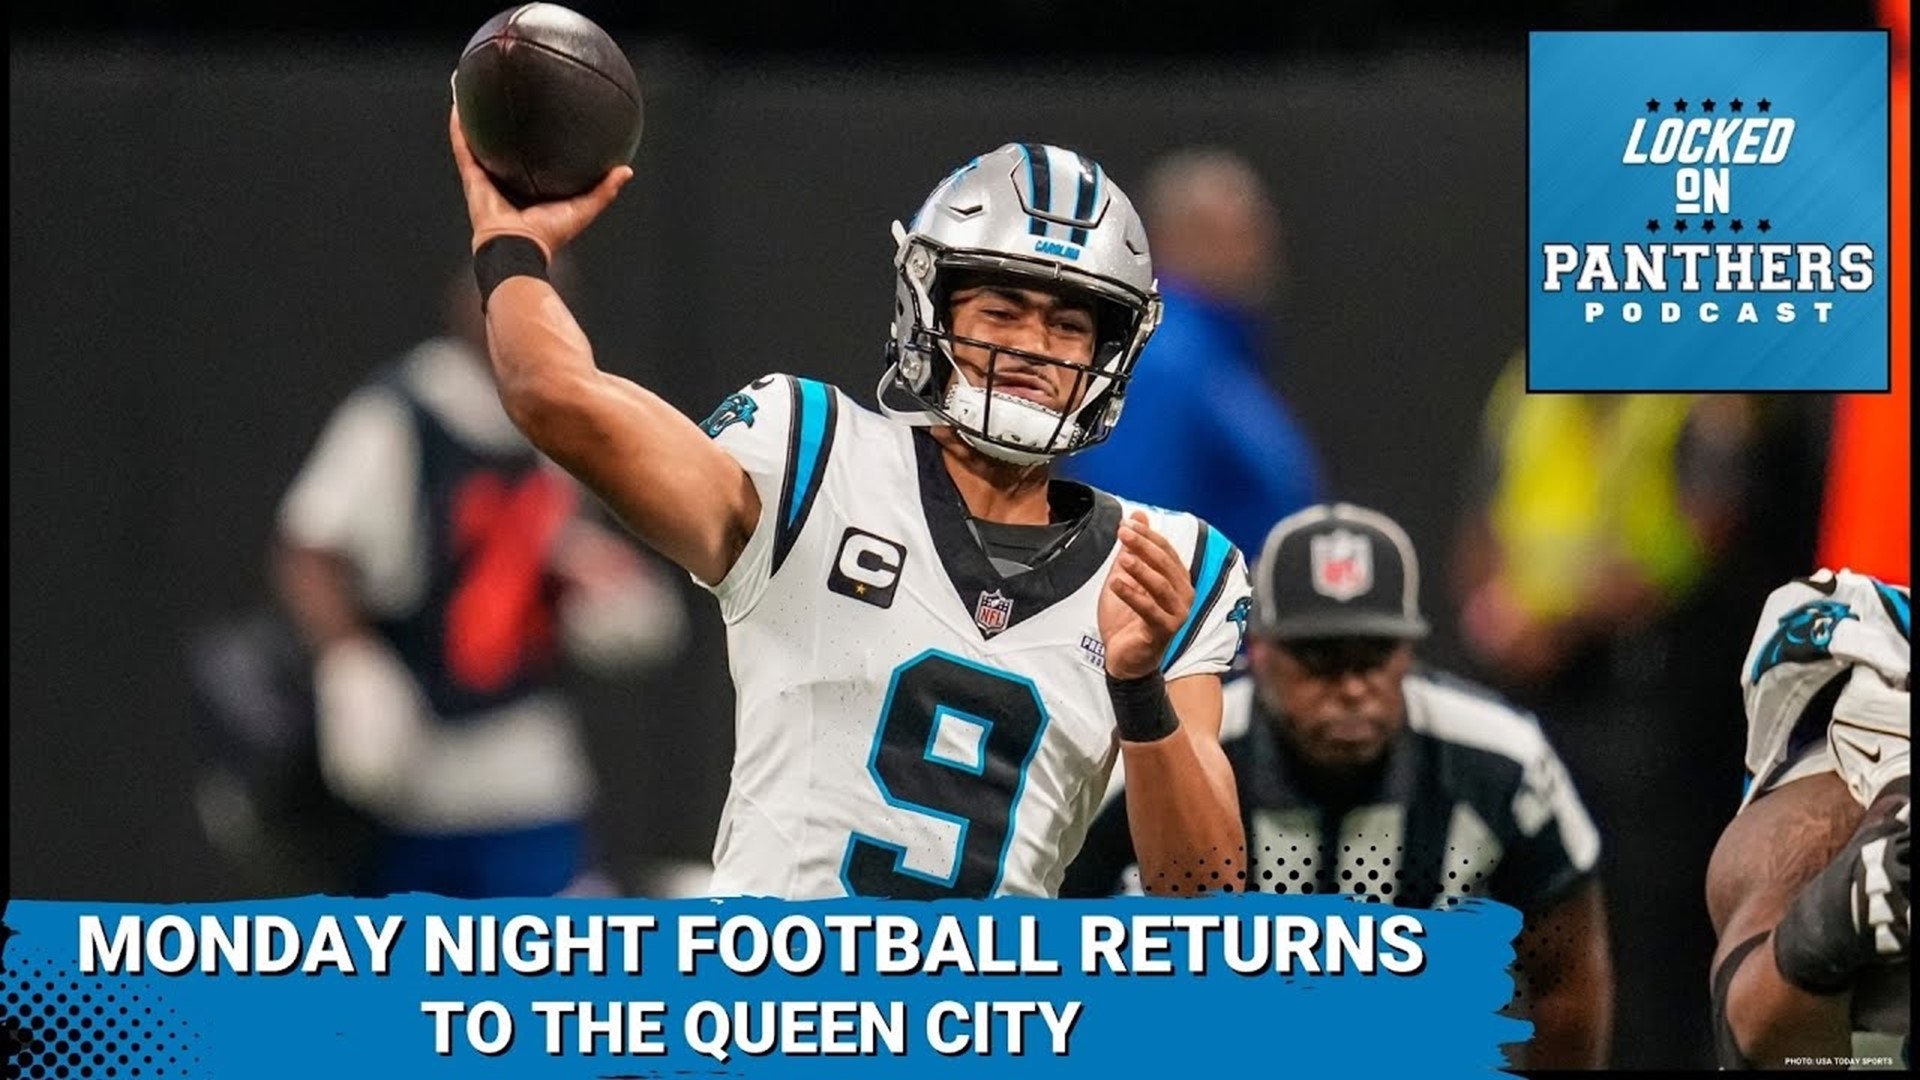 For the first time since 2018, Monday Night Football will take place in Uptown Charlotte at Bank of America Stadium.